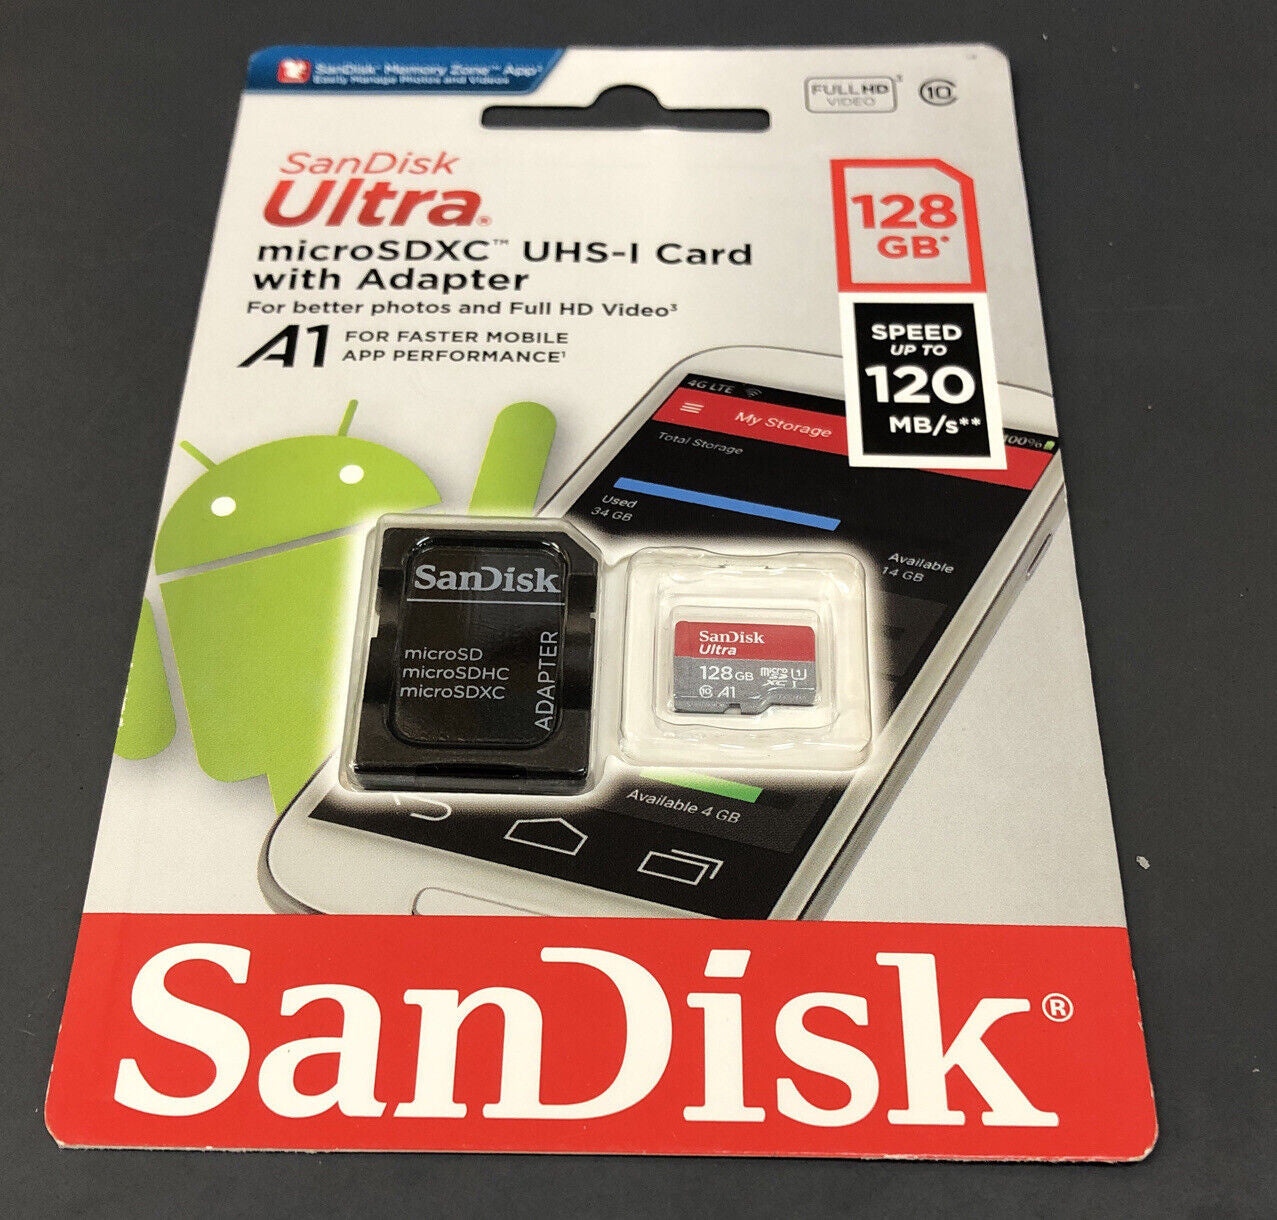 SanDisk Ultra micro SDXC UHS-I Card with Adapter 128GB Speed up to 120MB/s